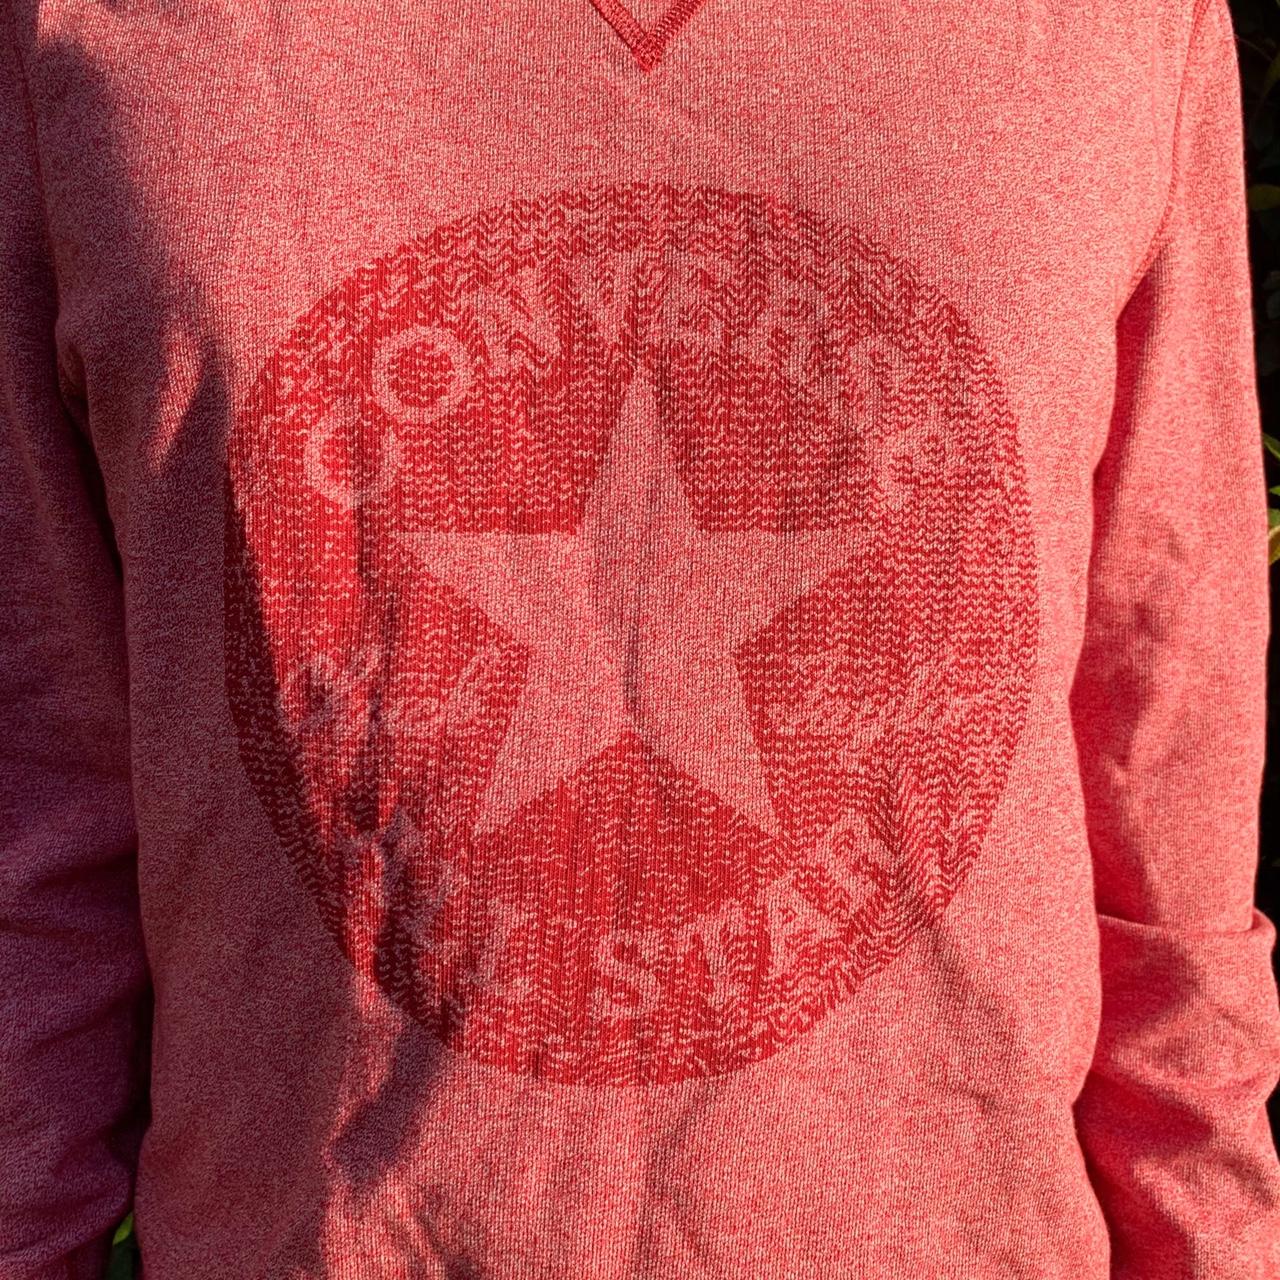 Converse Men's Pink and Red Jumper (2)